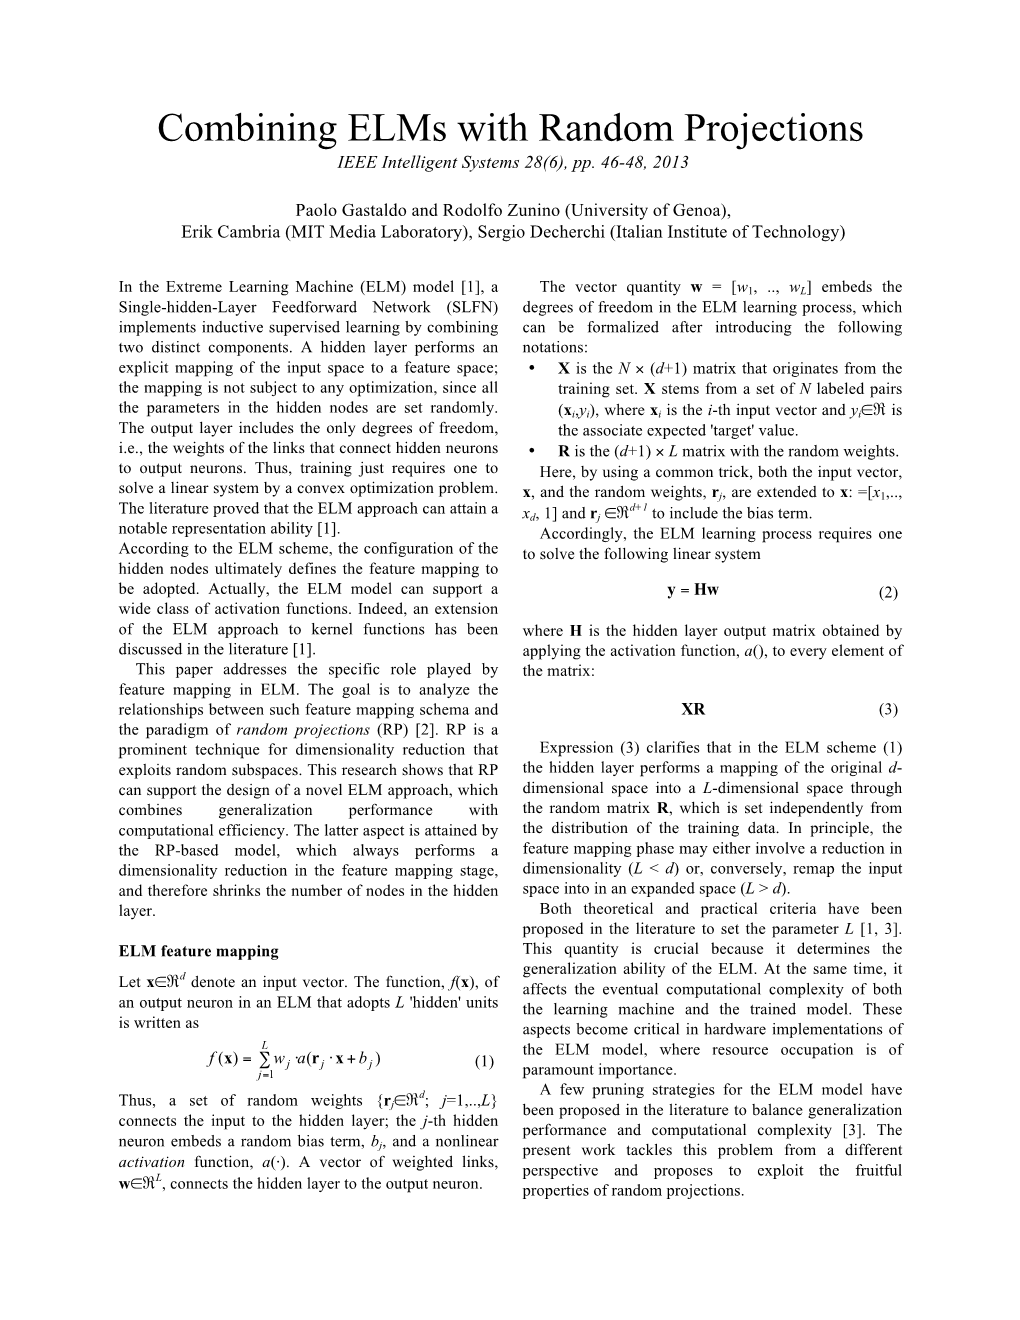 Combining Elms with Random Projections IEEE Intelligent Systems 28(6), Pp